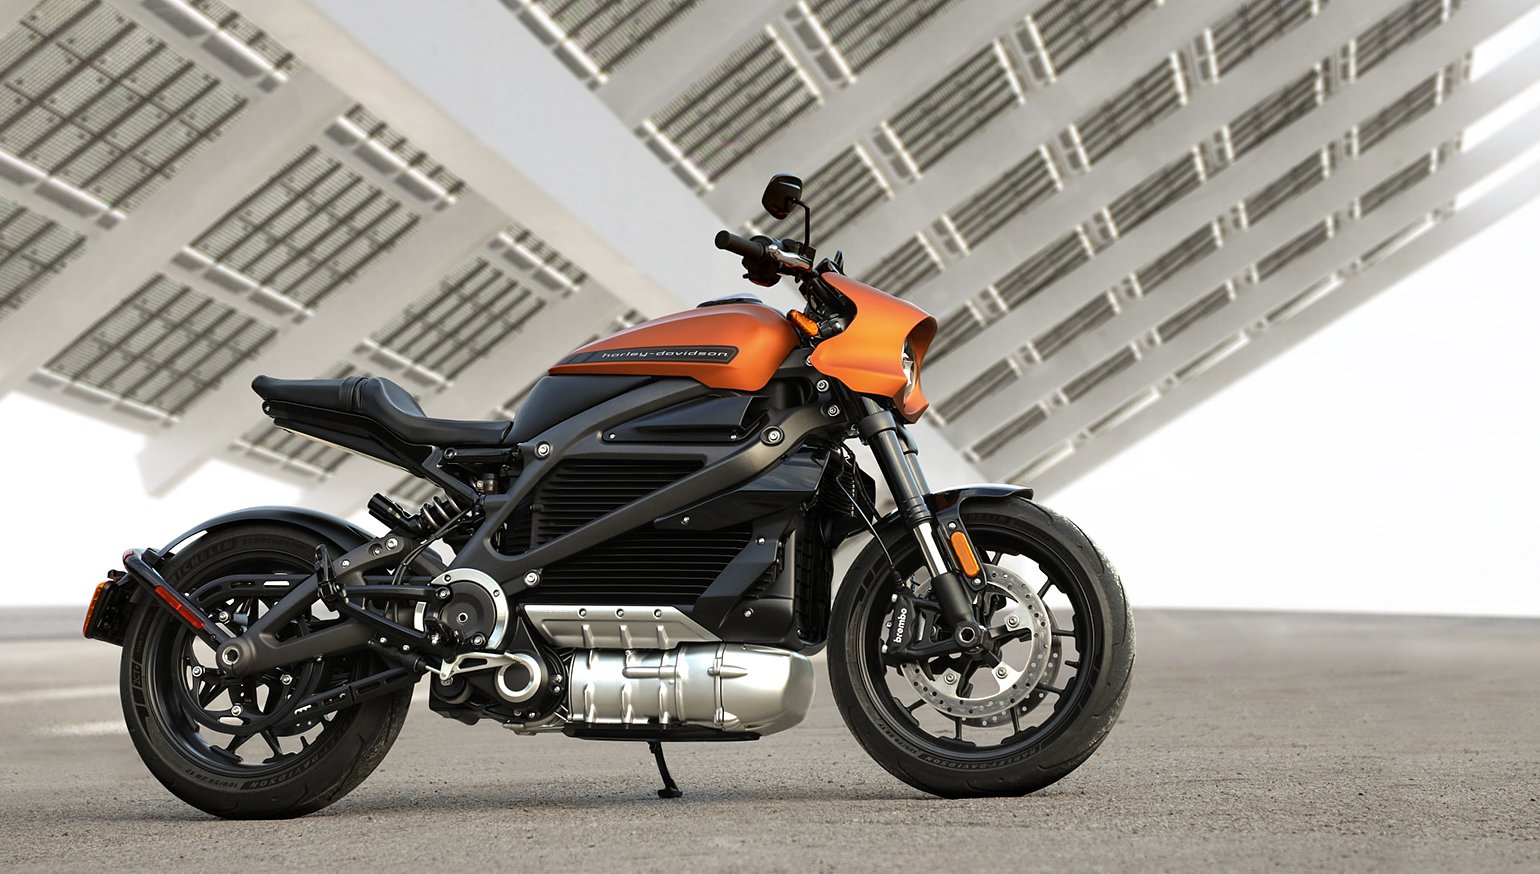 Harley Davidson Livewire Shows Drag Racing S Future In Science Of Speed